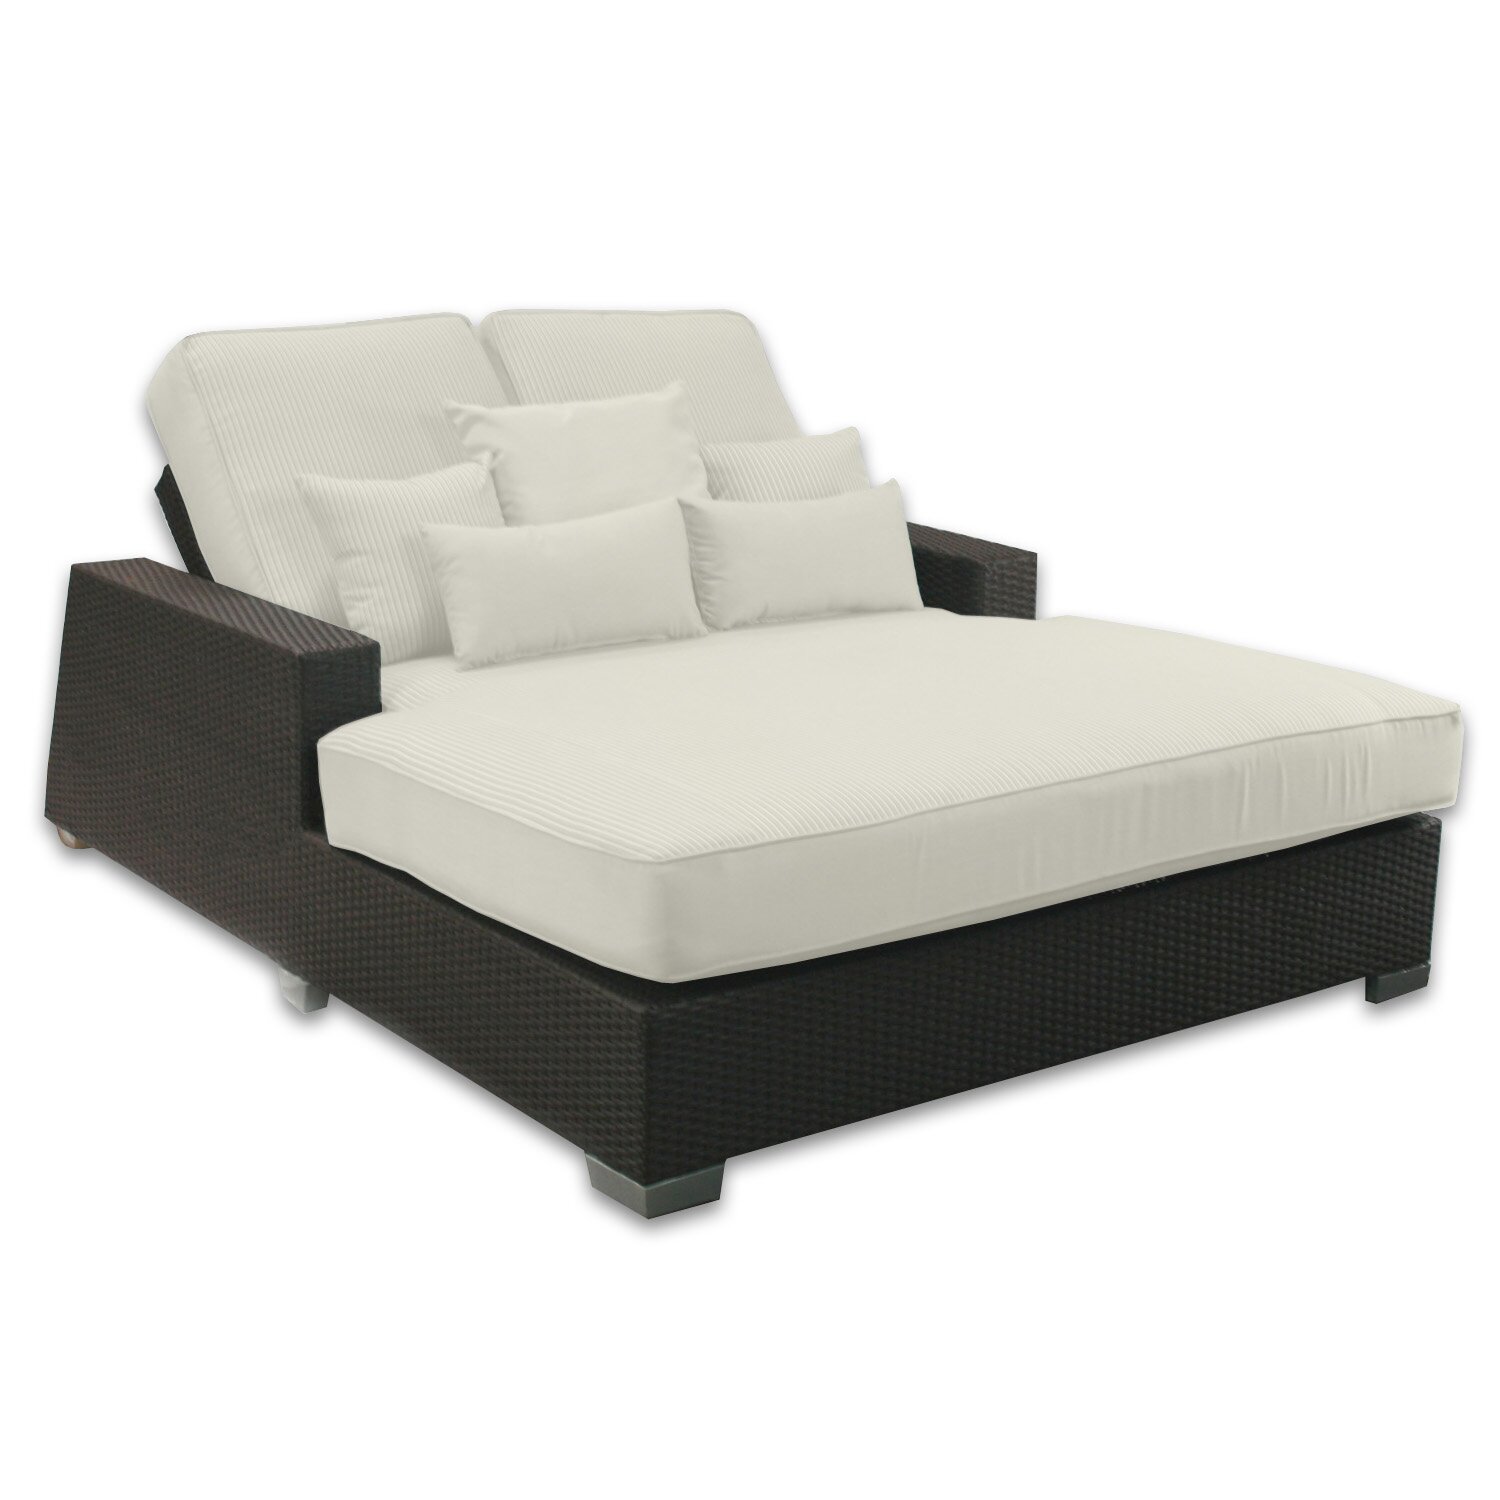 Signature Double Chaise Lounge with Cushion | Wayfair